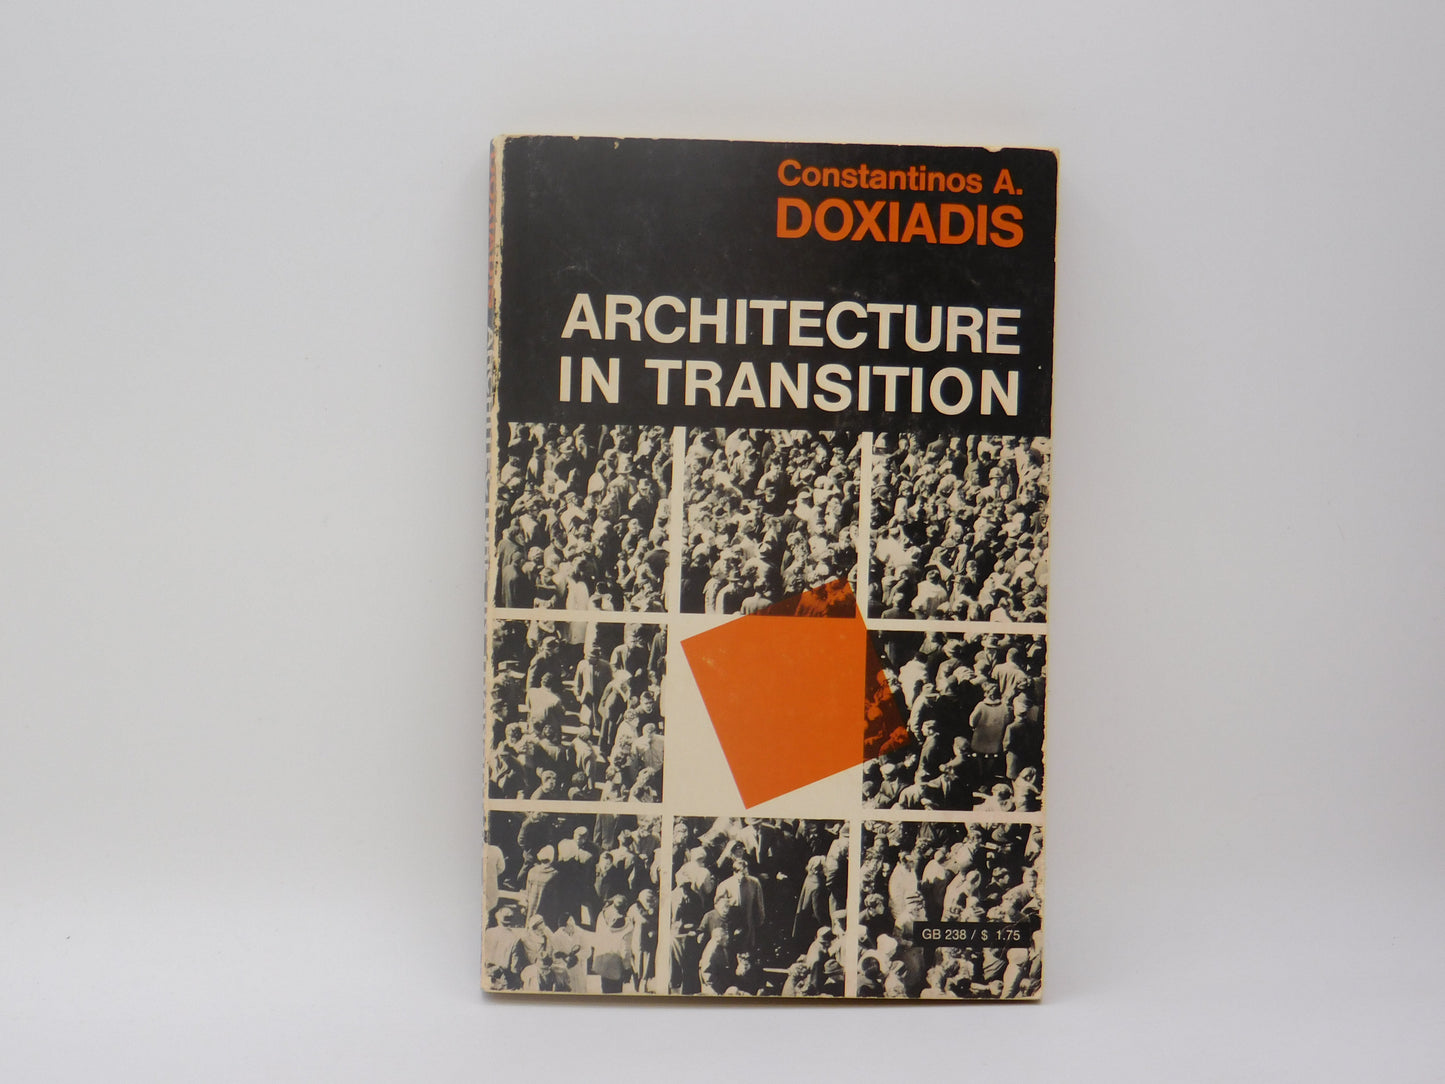 Architecture in Transition by Constantinos A. Doxiadis